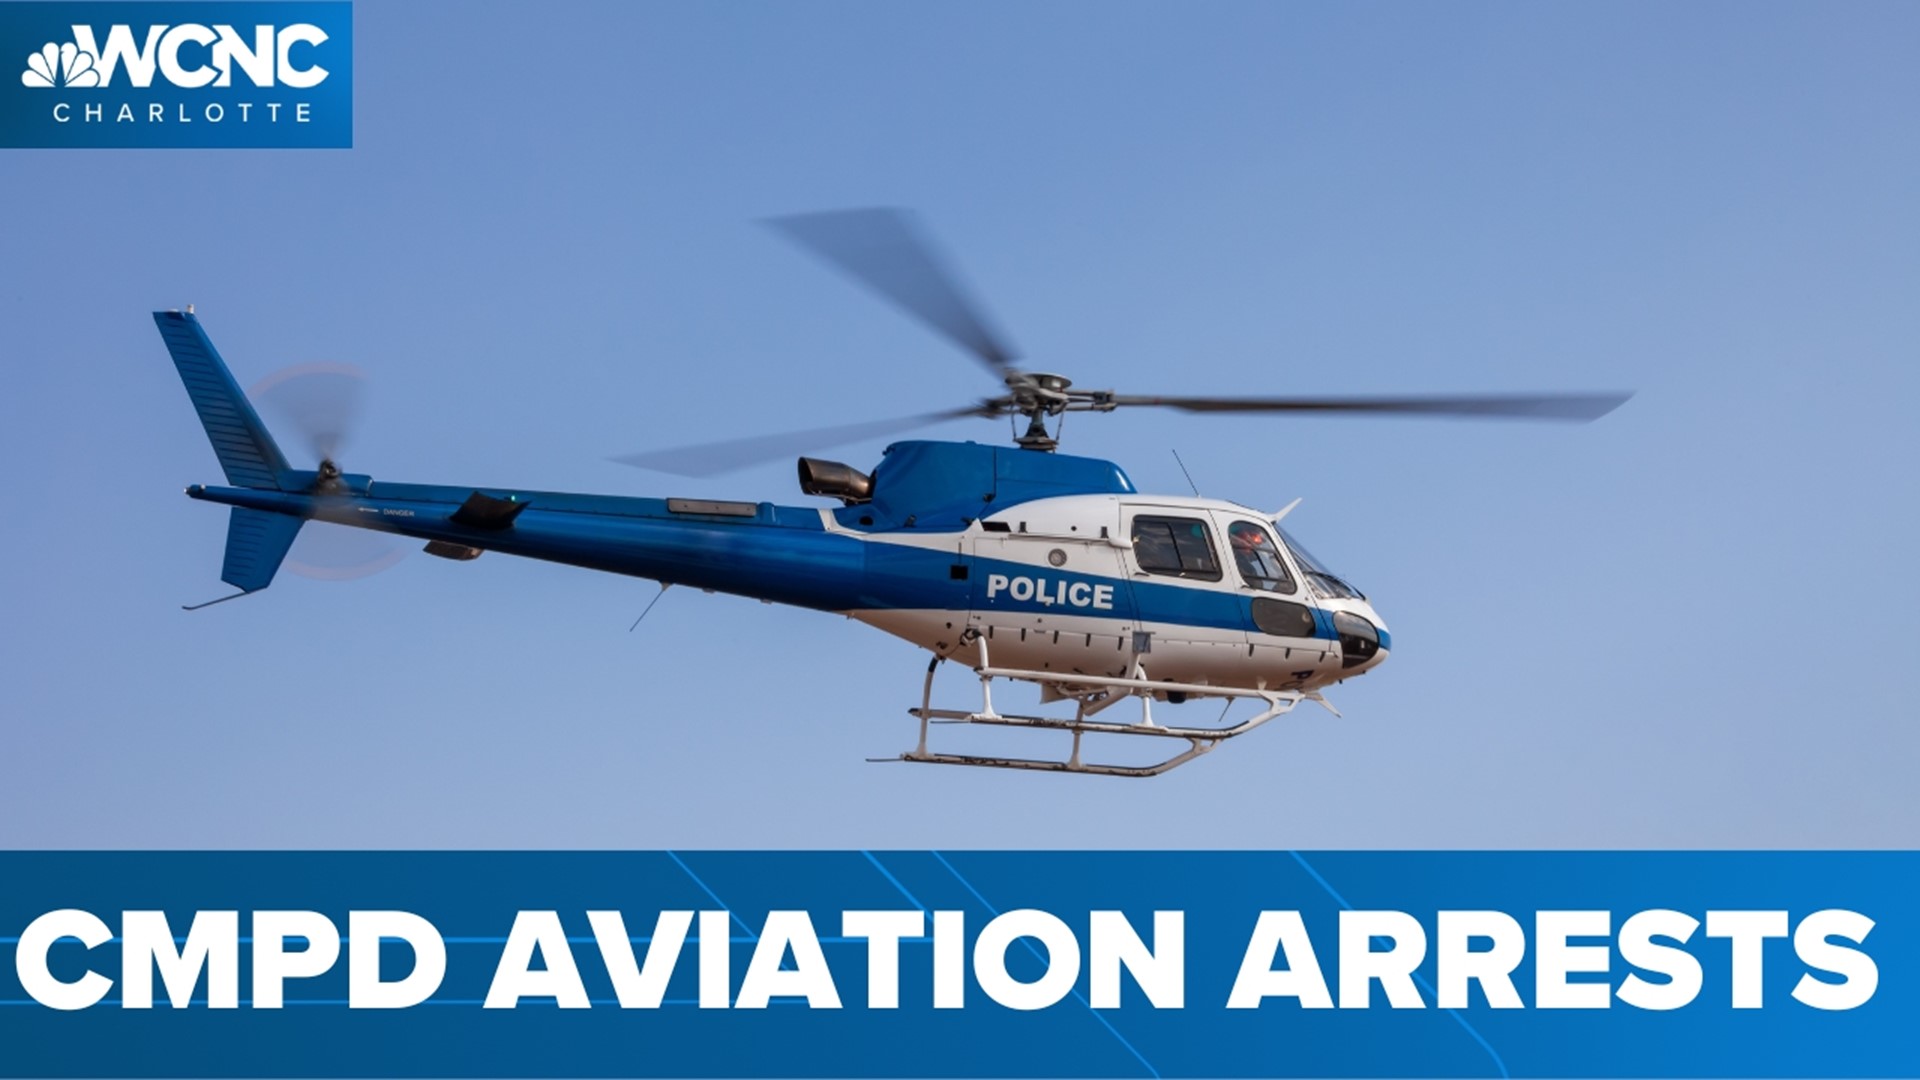 The CMPD Aviation Unit helps officers solve crimes and make arrests more efficiently and safely